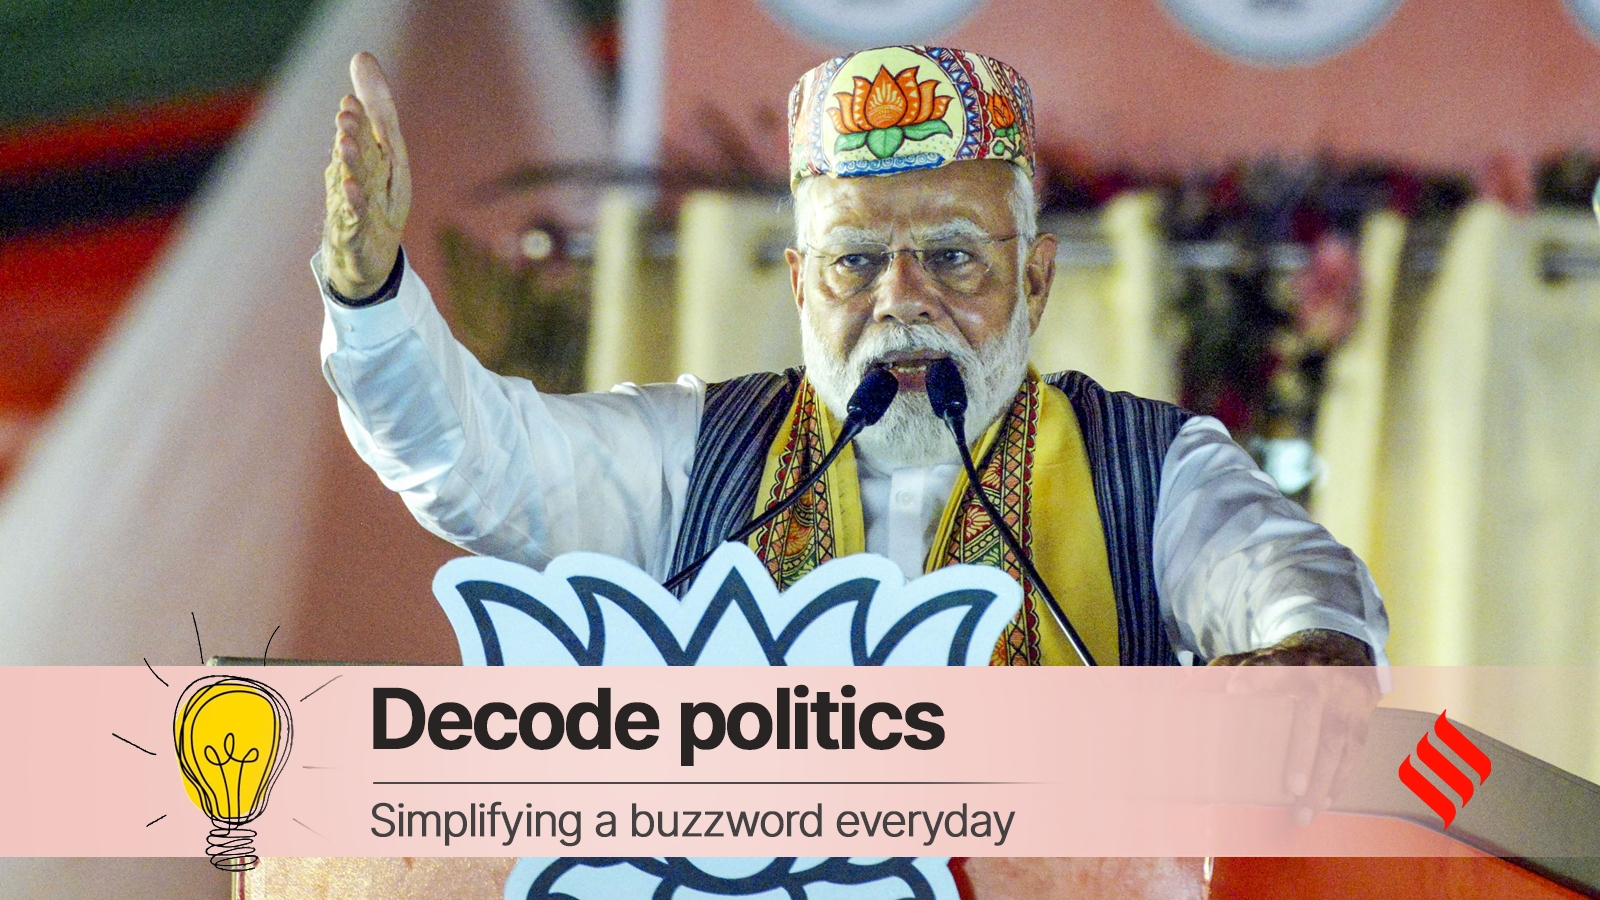 android, decode politics: modi raises a report on 2002 godhra train burning to attack lalu, congress. what was it?